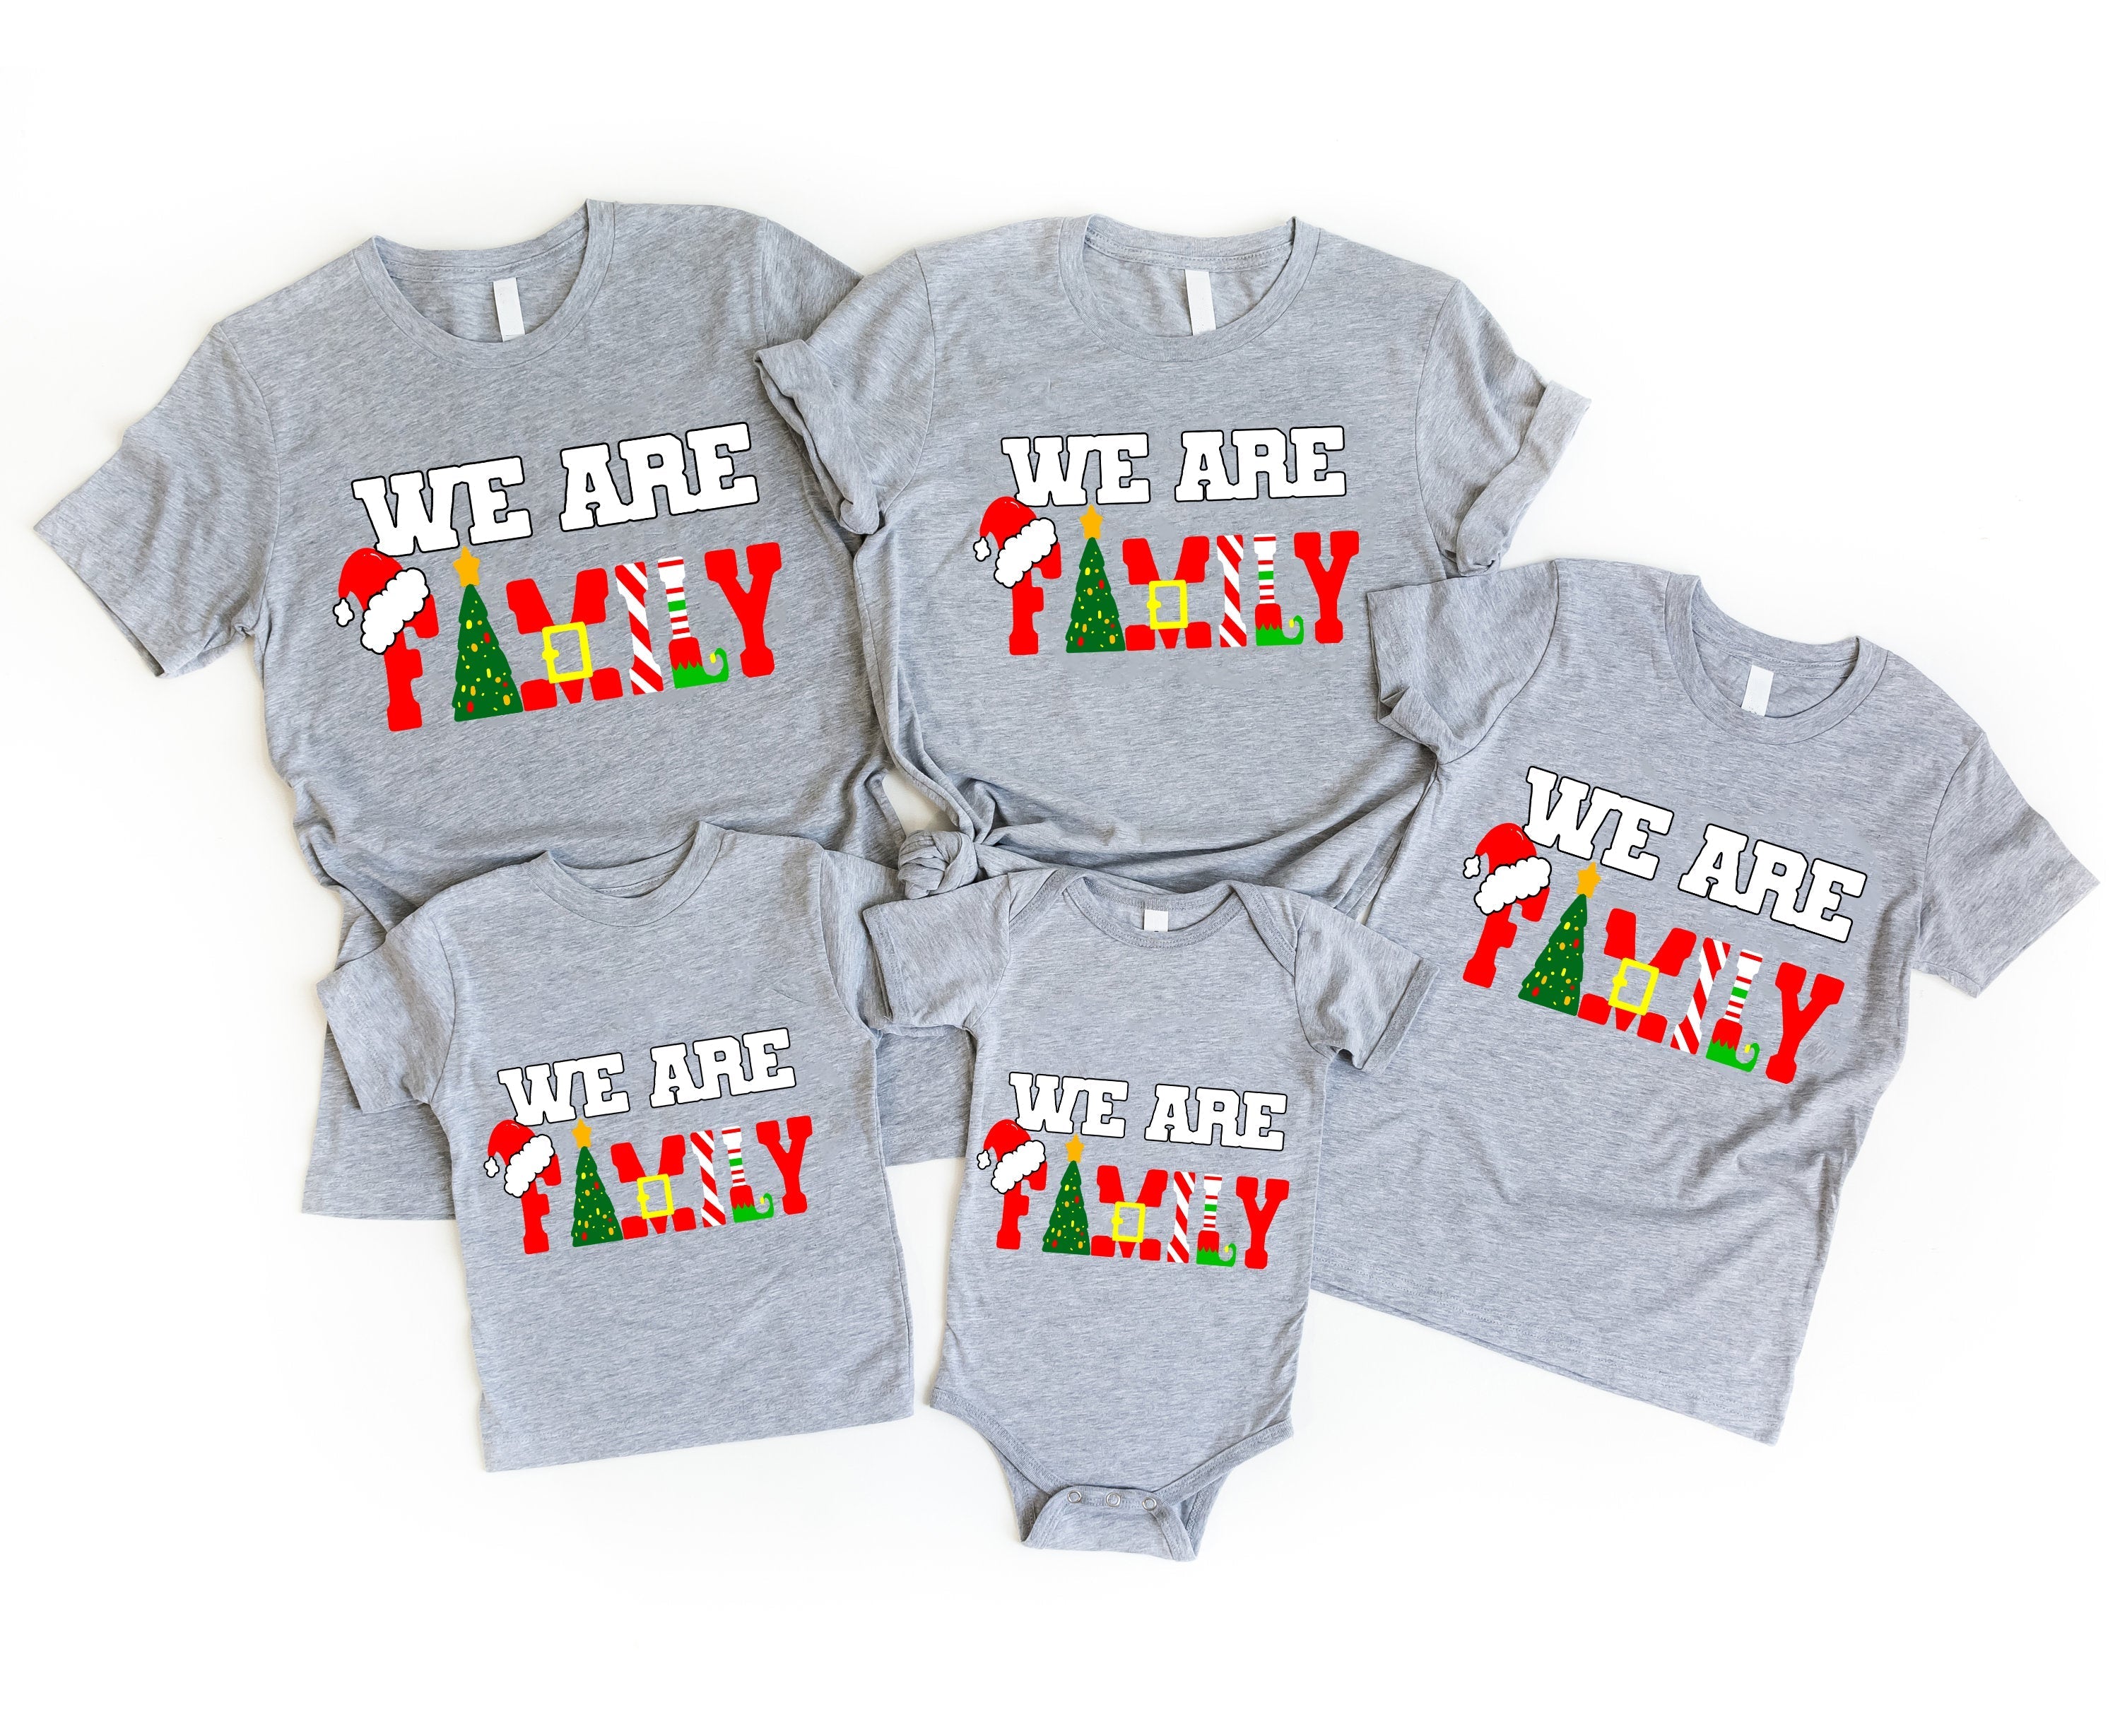 'We Are Family' Colorful Letter Pattern Family Christmas Matching Pajamas Tops Cute Gray Short Sleeve T-shirts With Dog Bandana